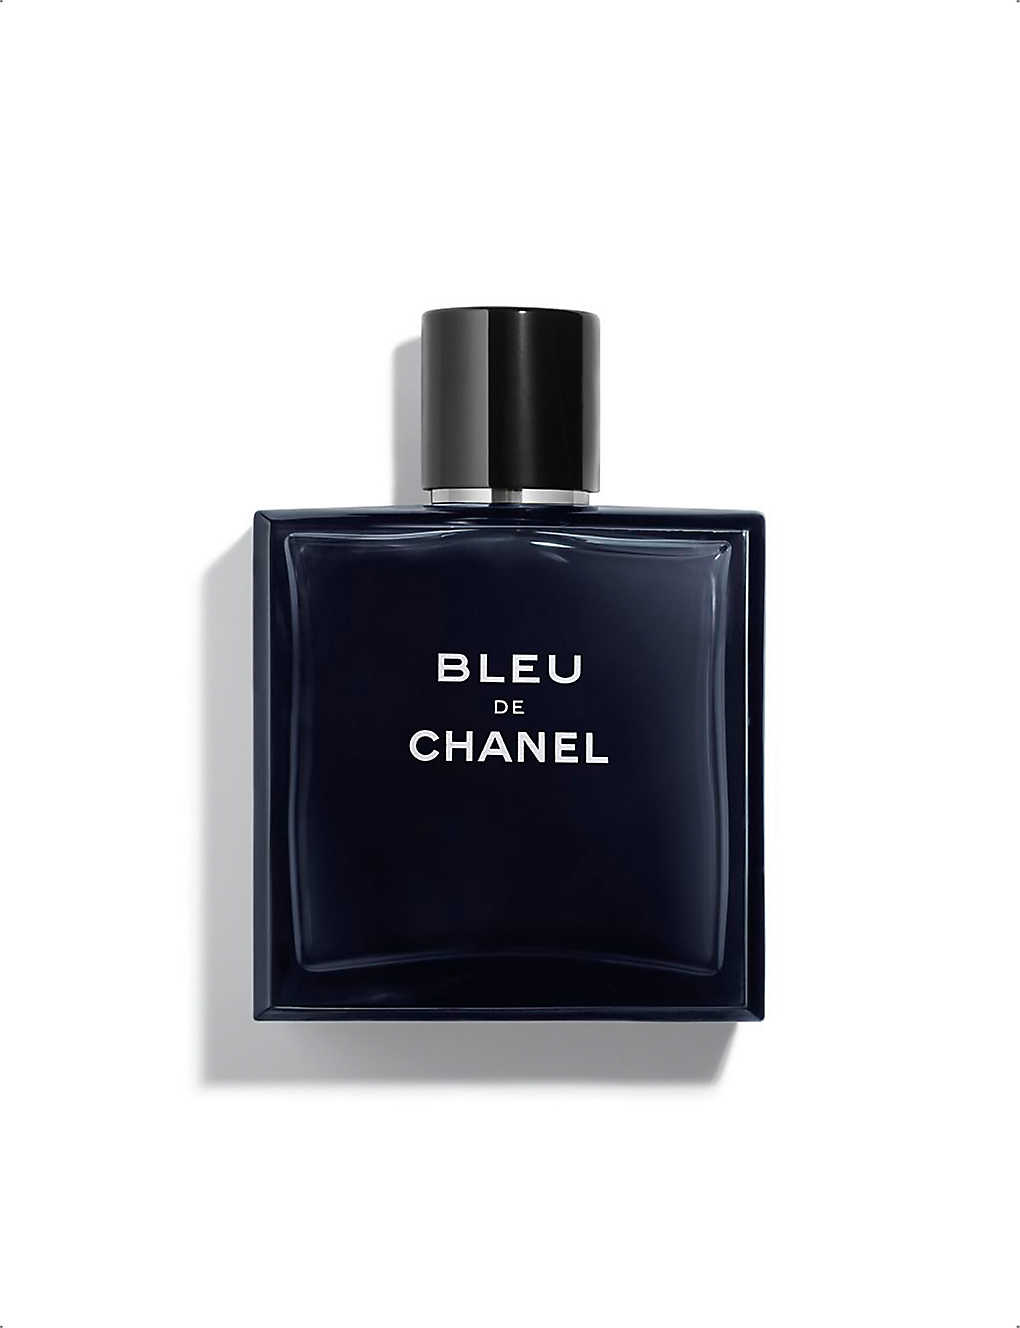 Chanel Bleu Perfume - Wholesale & Reseller Opportunities Available